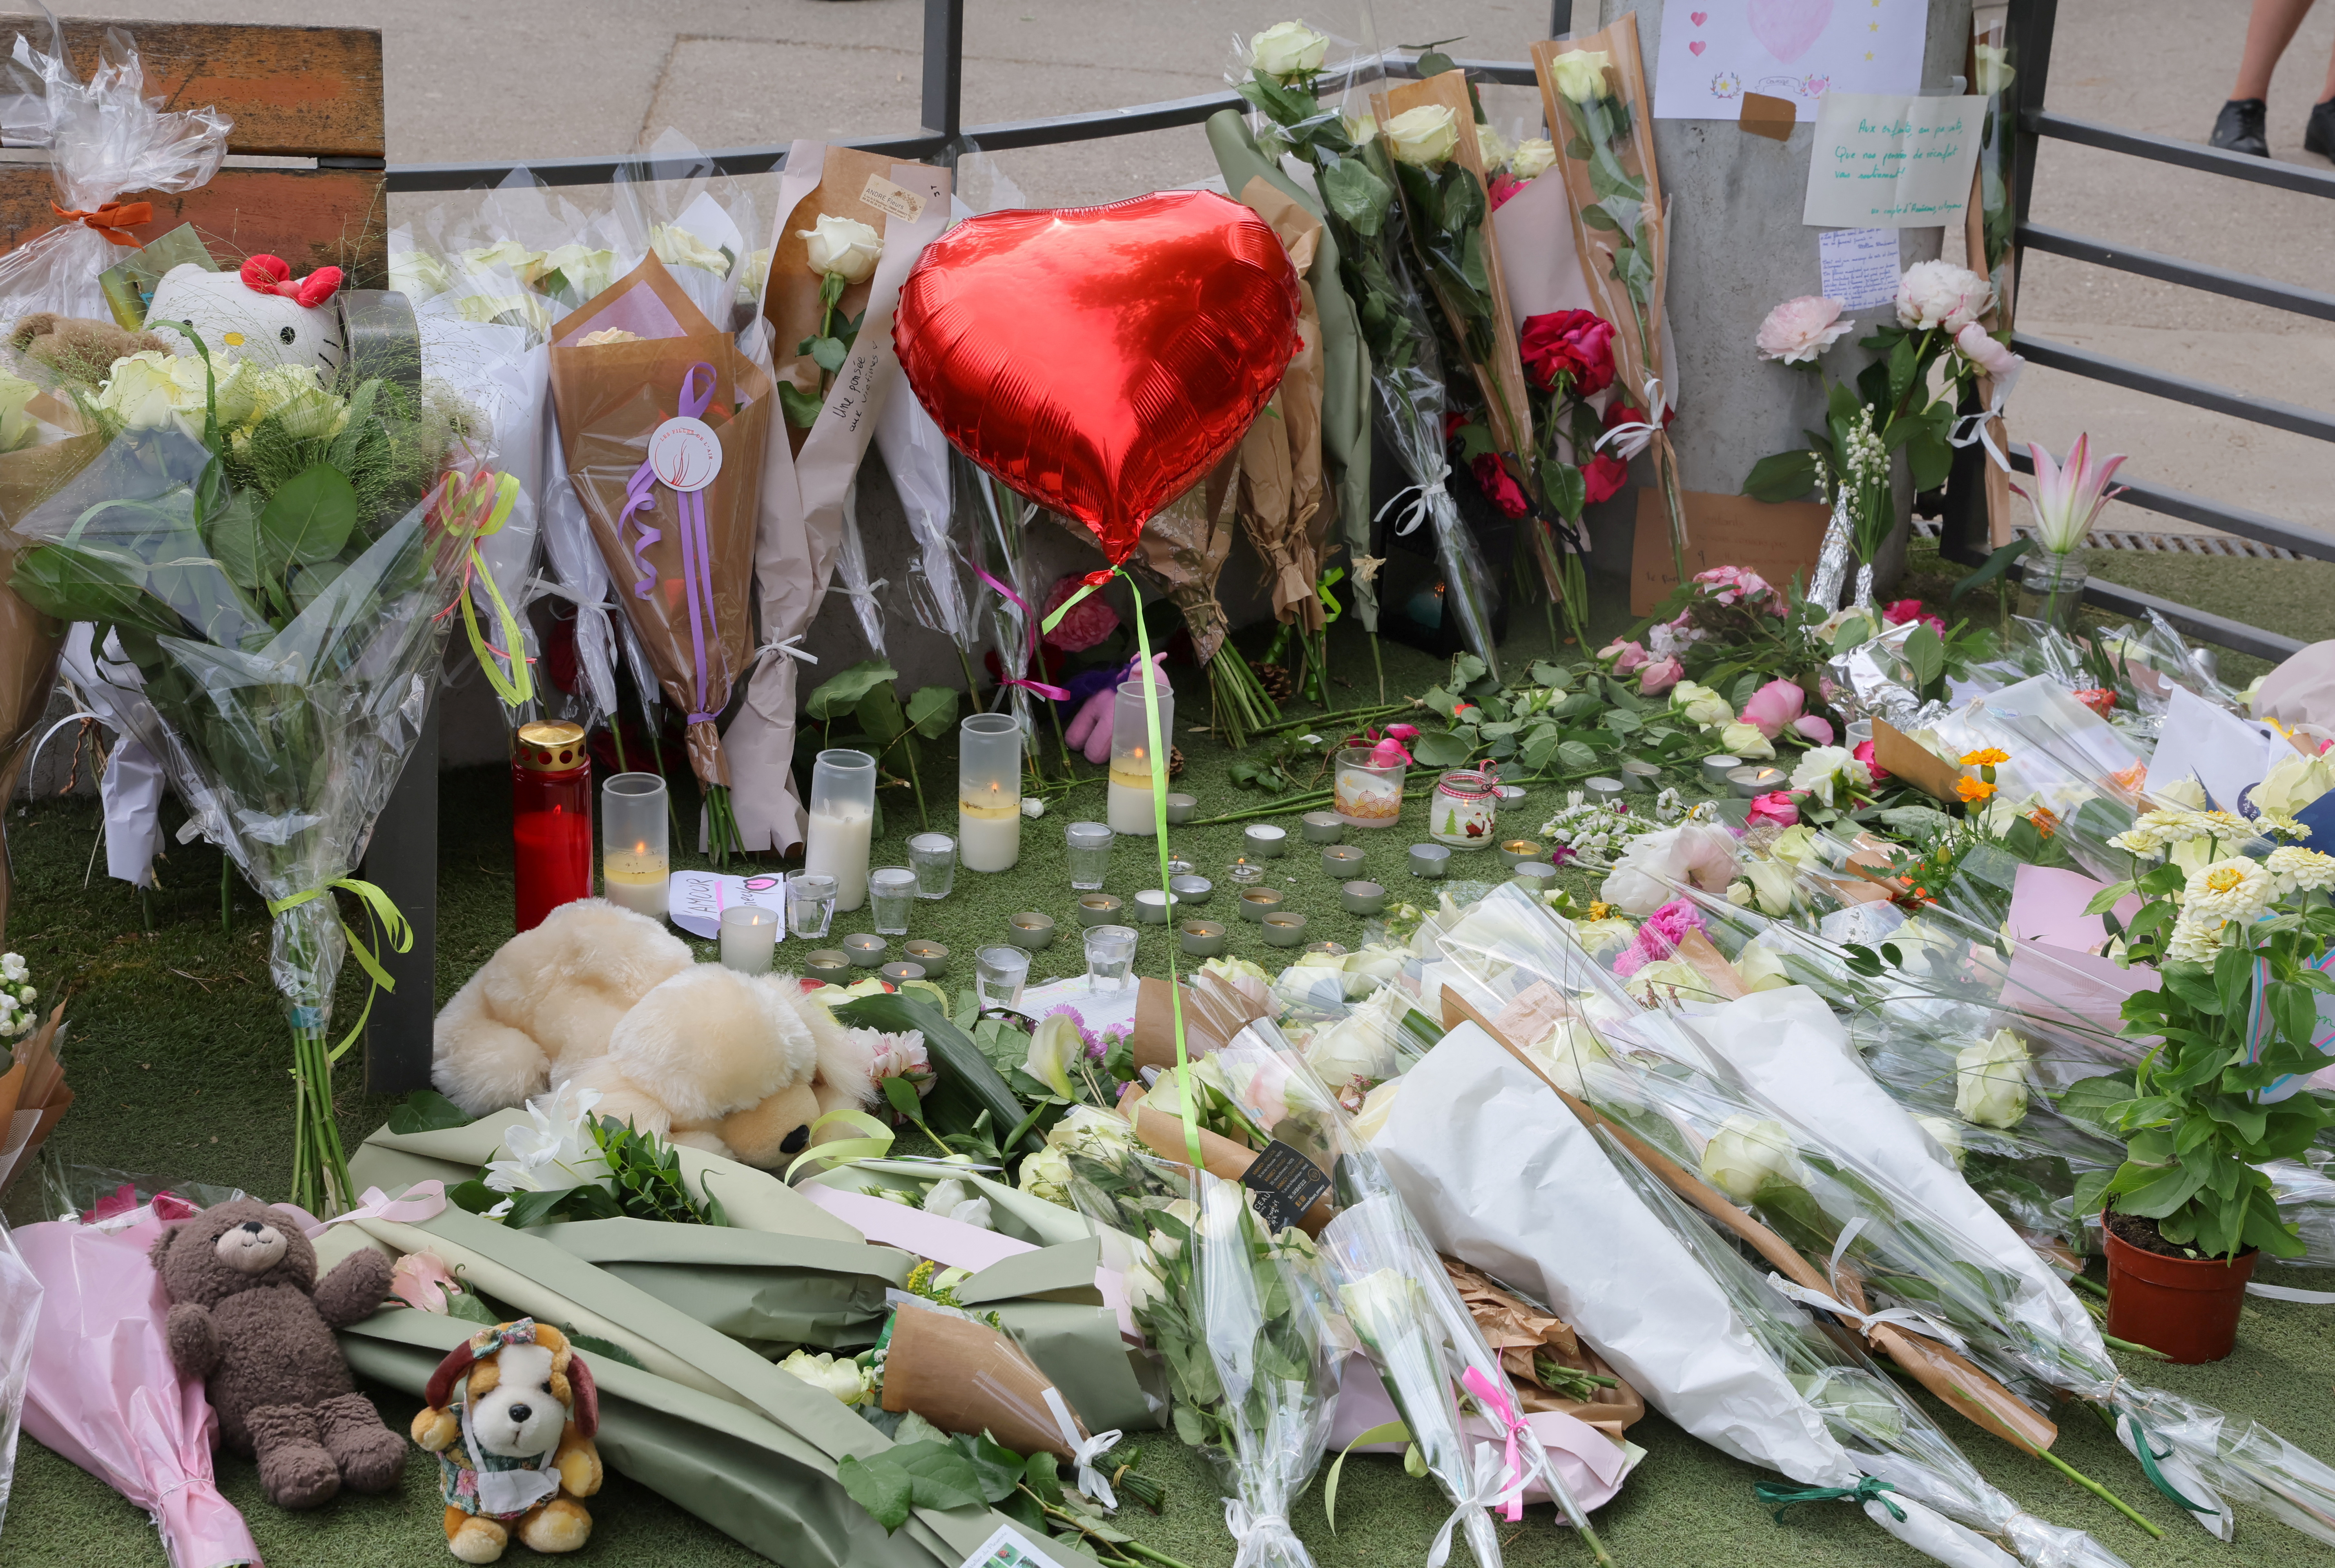 Tribute for victims the day after knife attack in French alpine town of Annecy